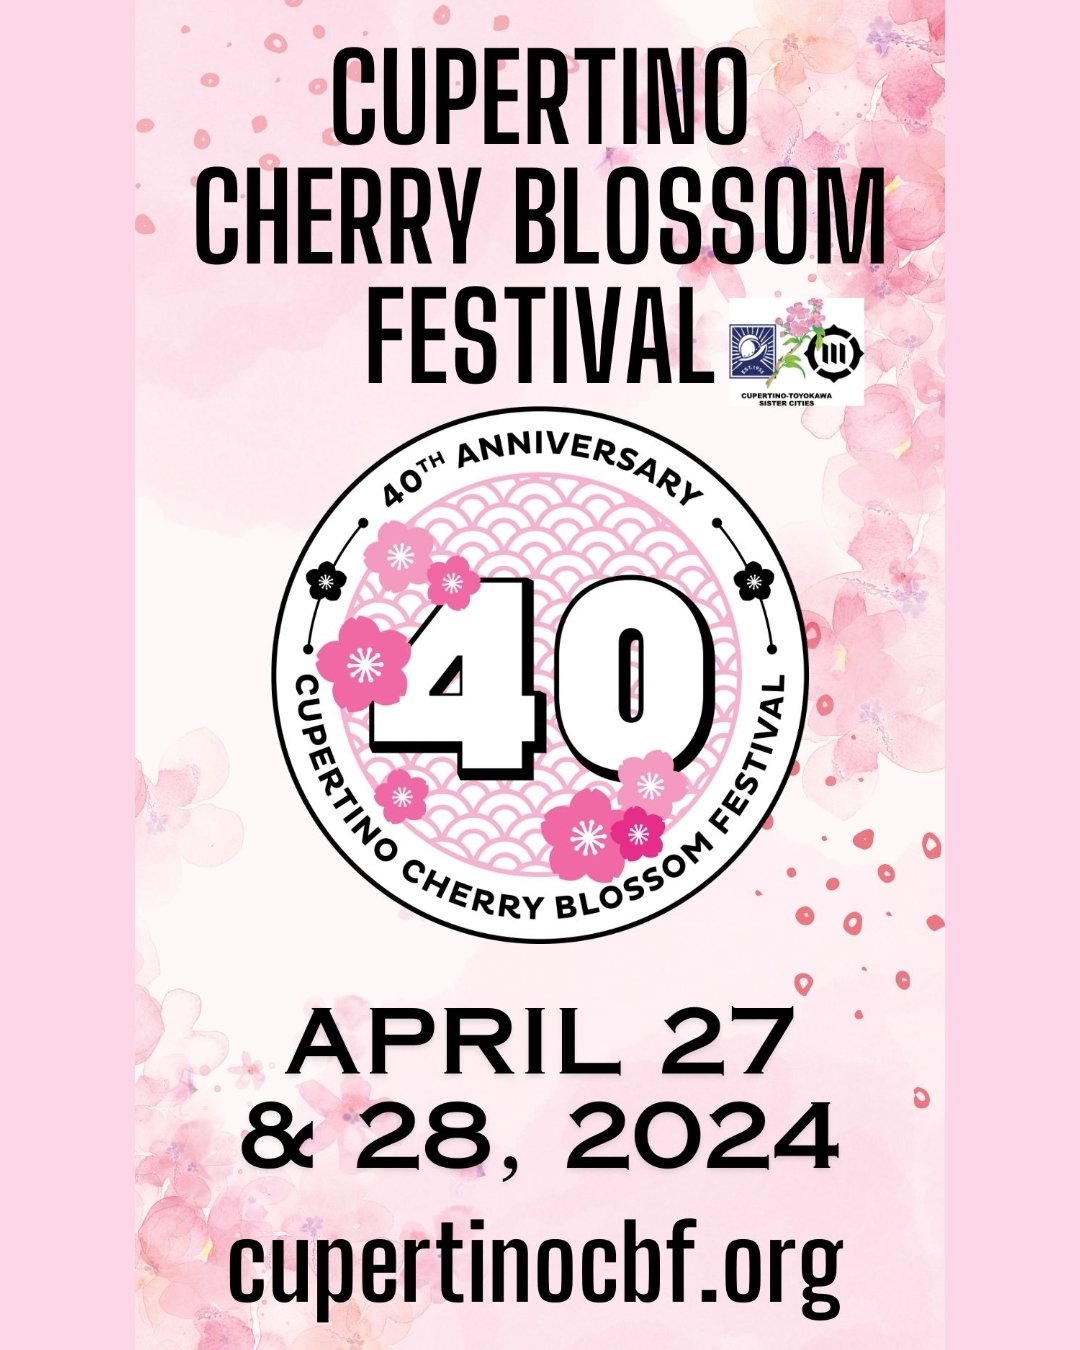 🌸 Cupertino Cherry Blossom Festival 🌸
This weekend!
New Menu Item!! 🍒🌰🥐🟫 (Reveal coming soon!)
🌸 Cupertino Cherry Blossom Festival @cupertino_cbf
🗓️ Sat &amp; Sun, April. 27-28 | 10am-5:30pm
📍Cupertino Memorial Park
21121 Stevens Creek Blvd,